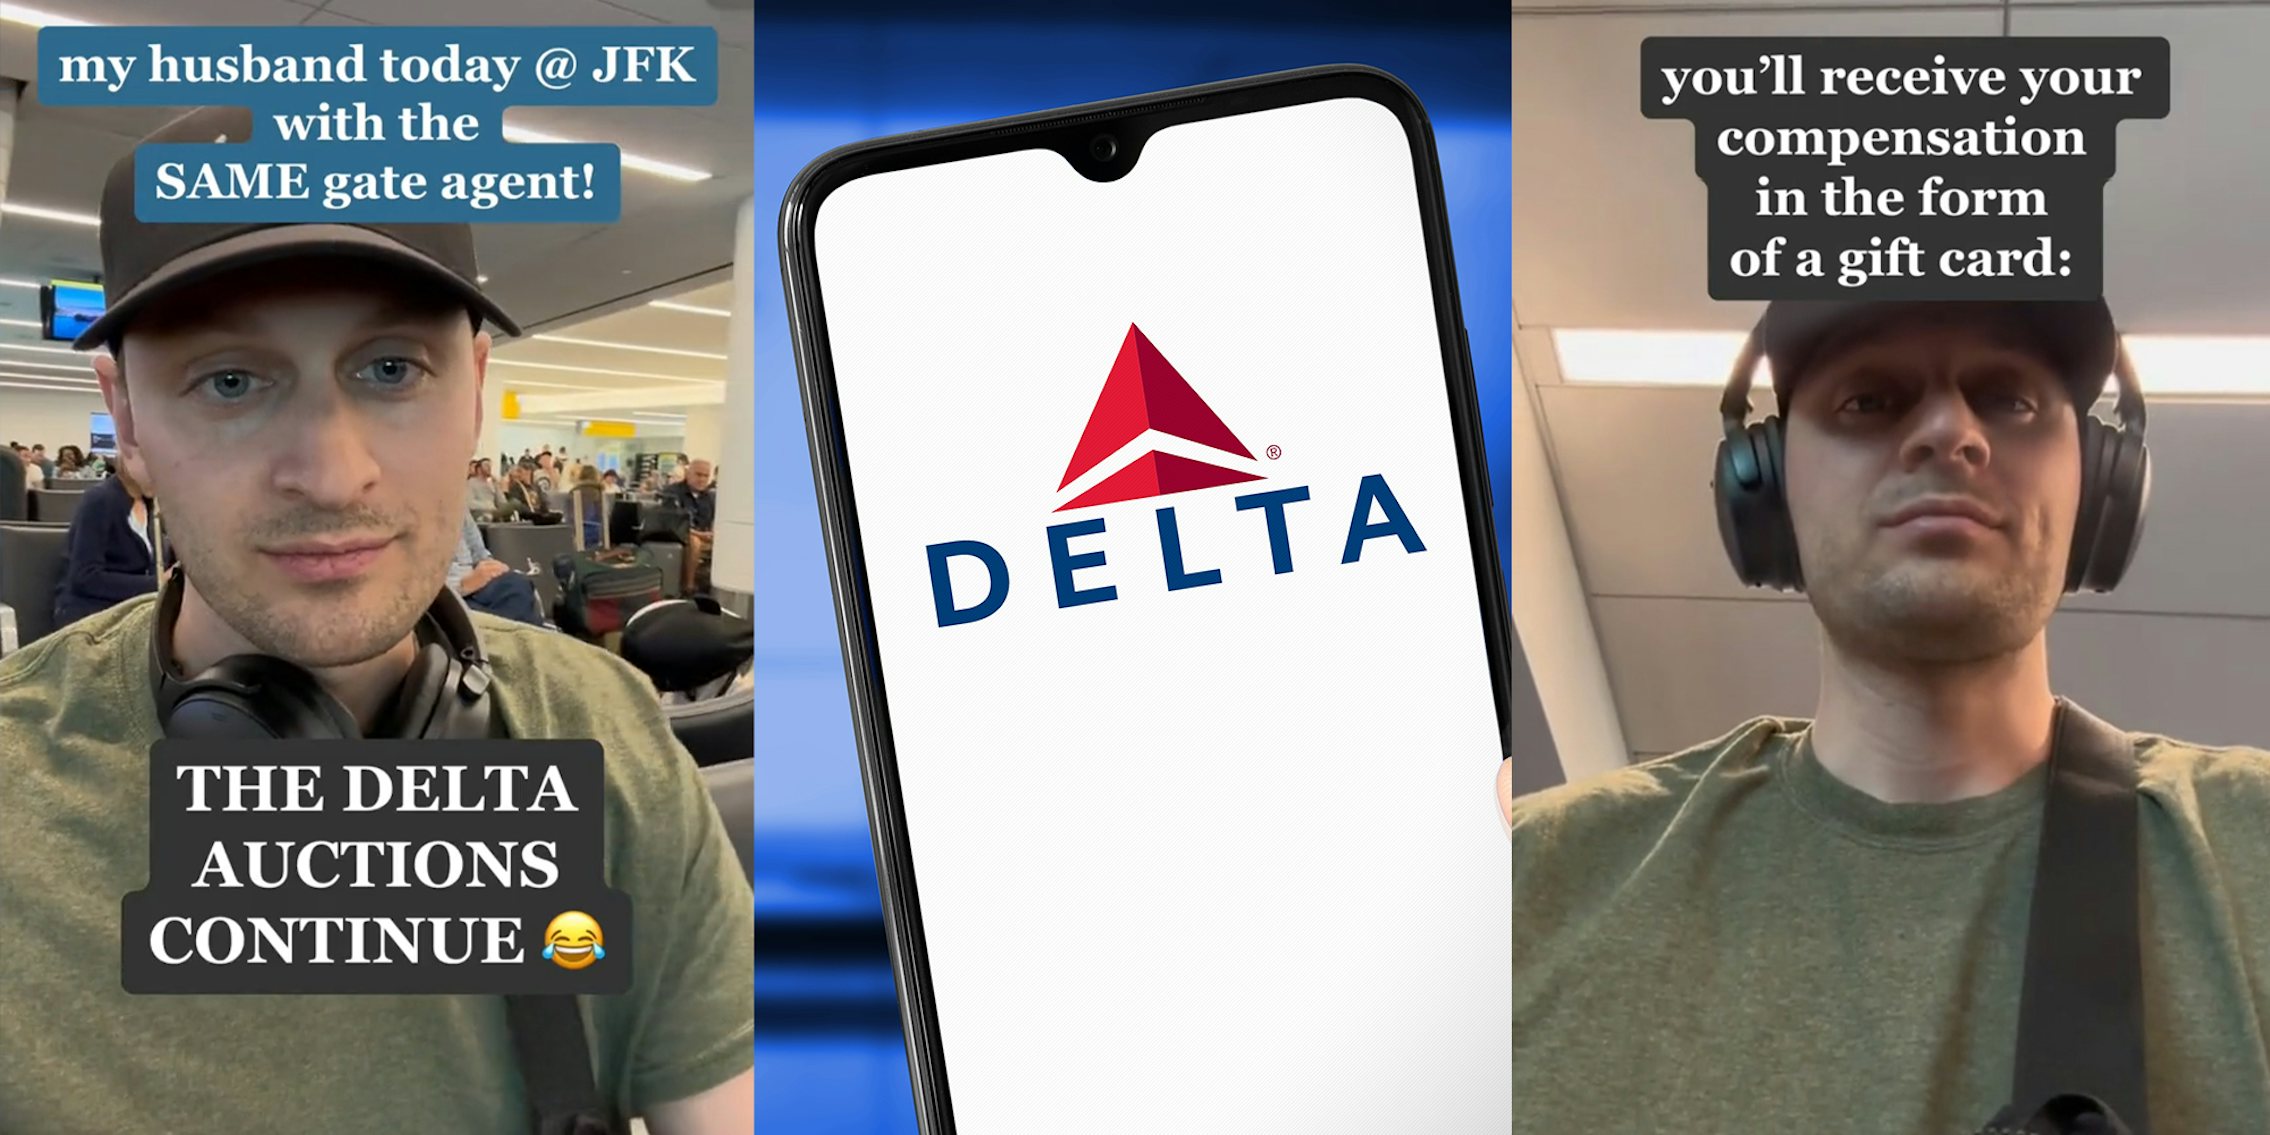 Man listening to Gate Agent at Delta Airlines Gate; Phone with blue background showing Delta Logo